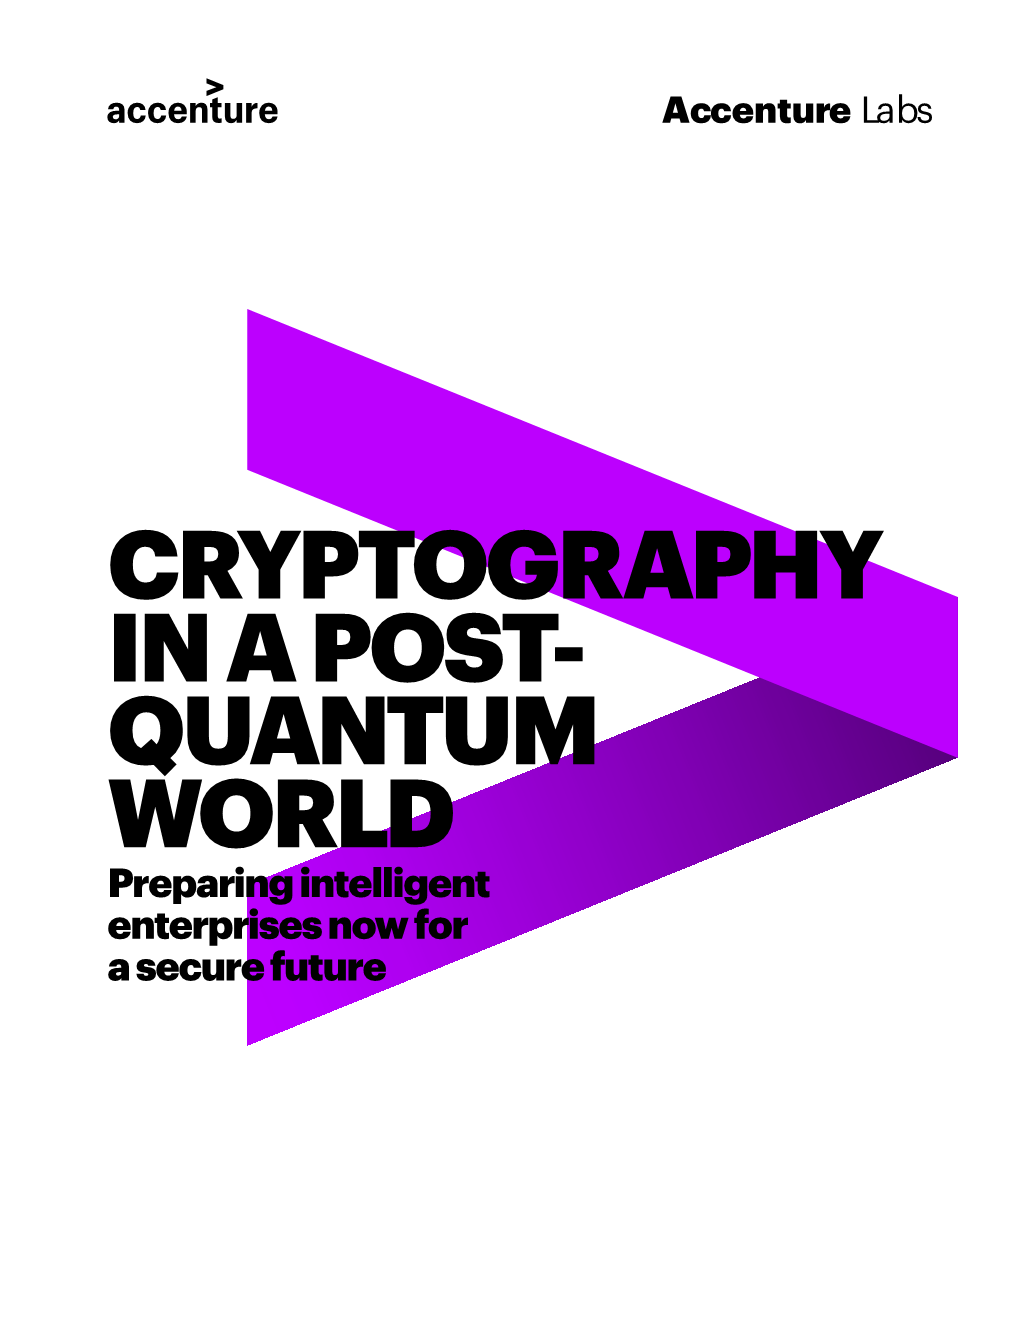 CRYPTOGRAPHY in a POST- QUANTUM WORLD Preparing Intelligent Enterprises Now for a Secure Future EXECUTIVE SUMMARY